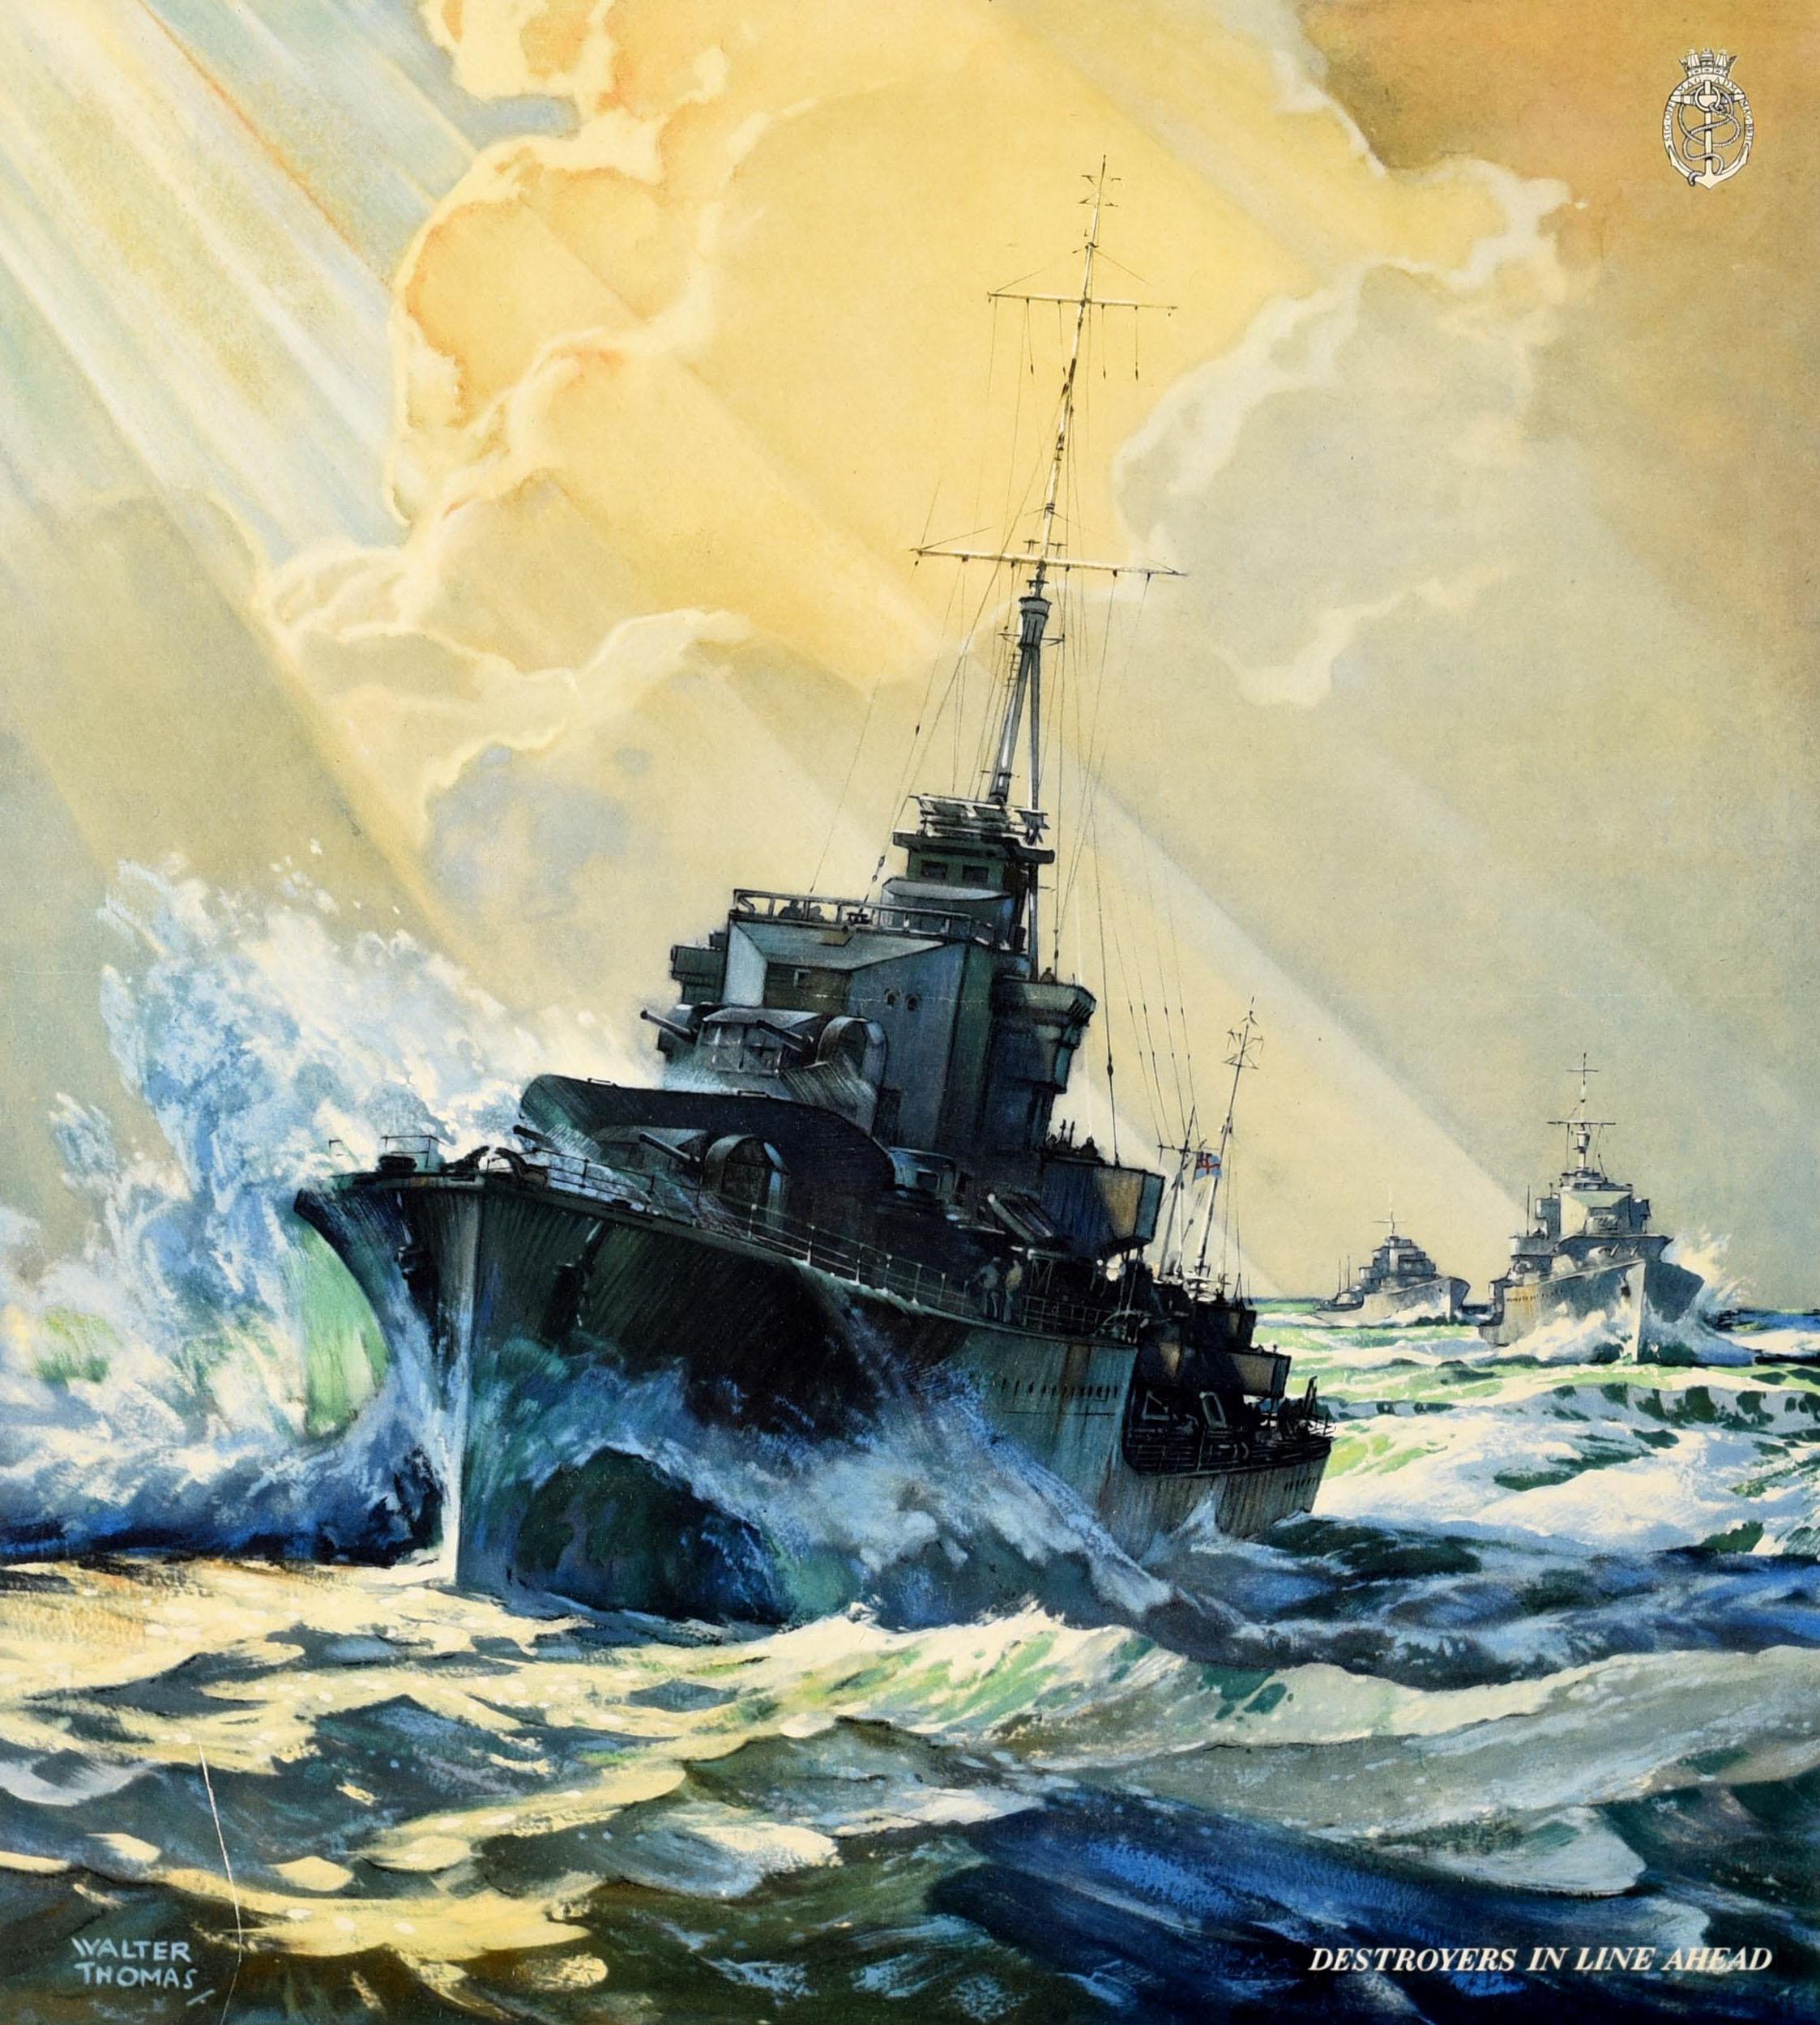 Original vintage World War Two poster - Britain's Sea Power Maintain it with your Savings - featuring a dynamic image of Royal Navy warships at sea in choppy waves with the sun shining through the clouds above, titled Destroyers in Line Ahead.